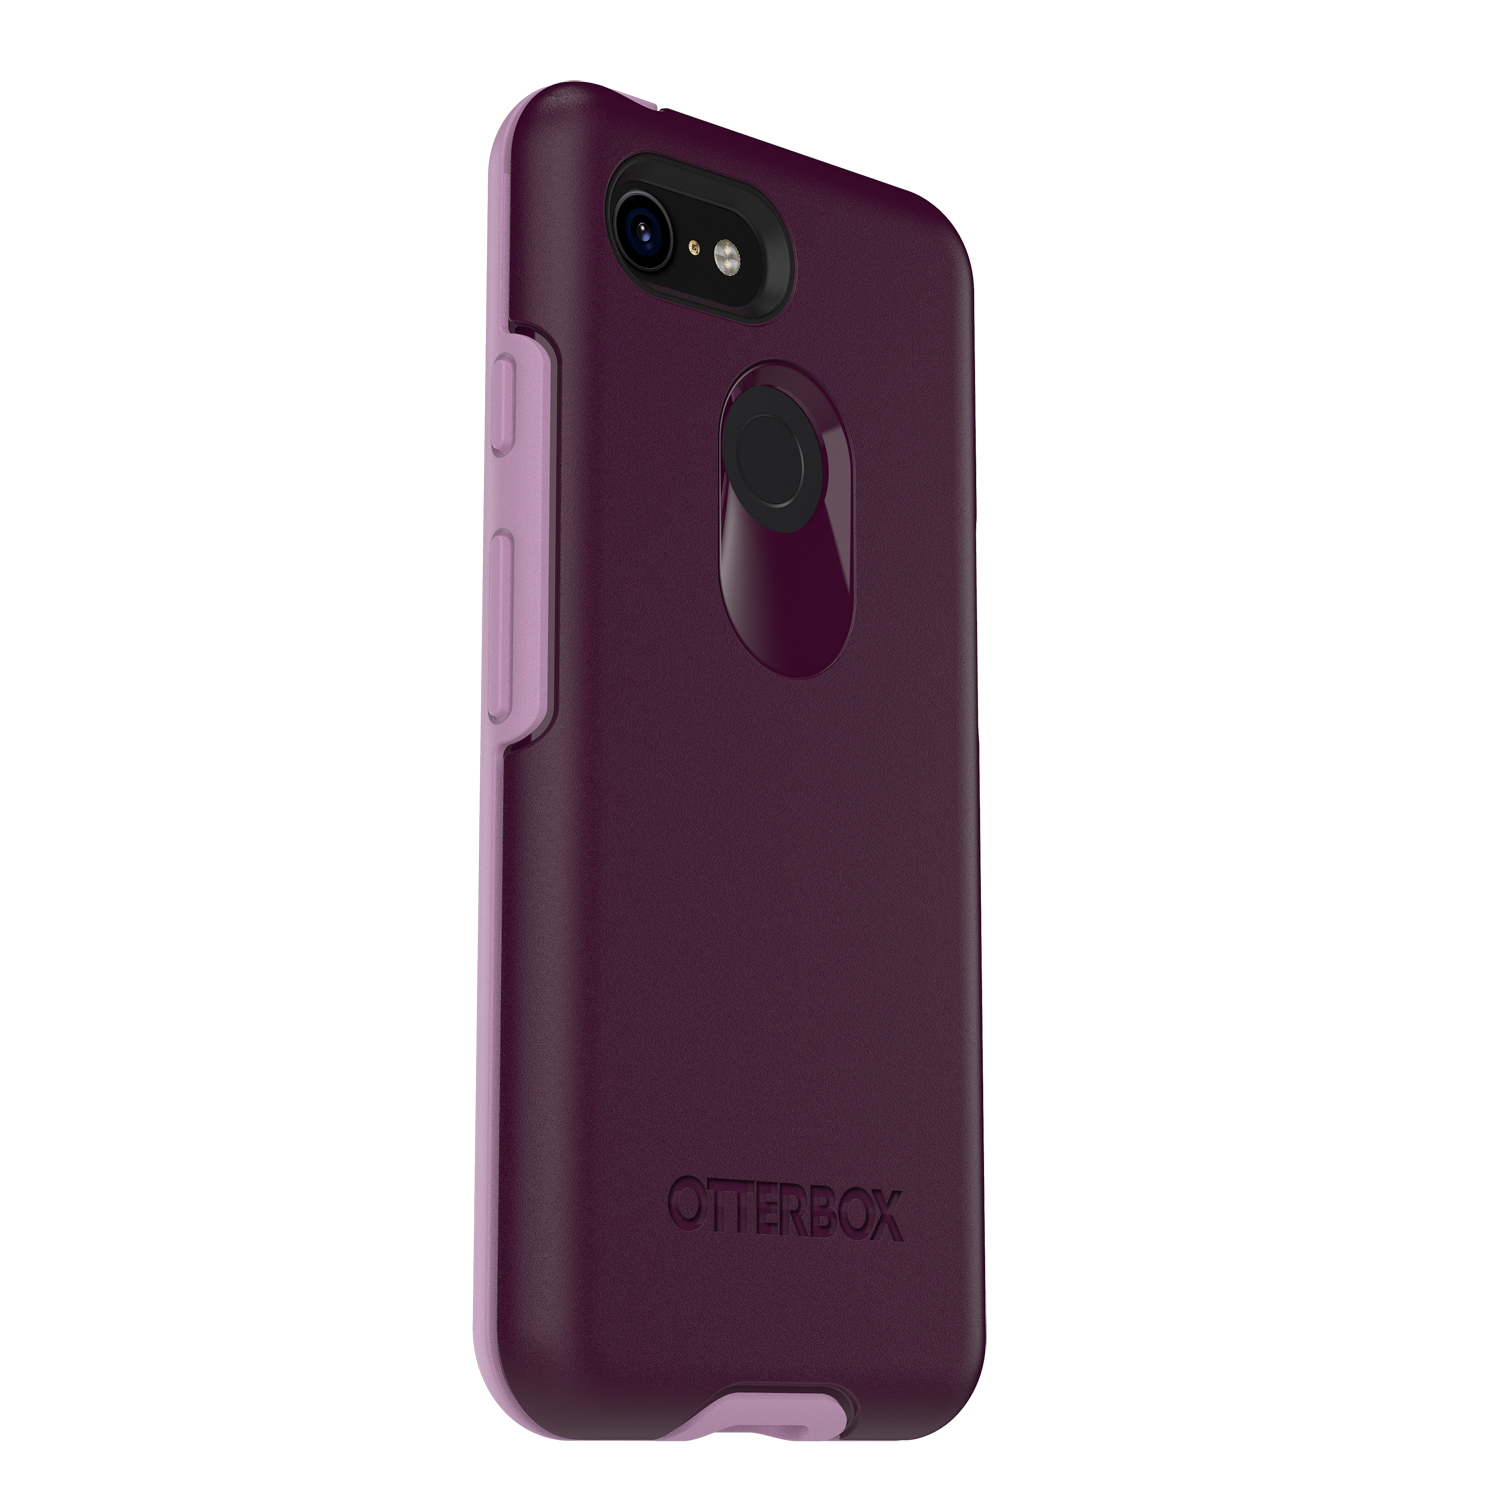 Otterbox Symmetry Series Case for Google Pixel 3, Tonic Violet - image 2 of 6